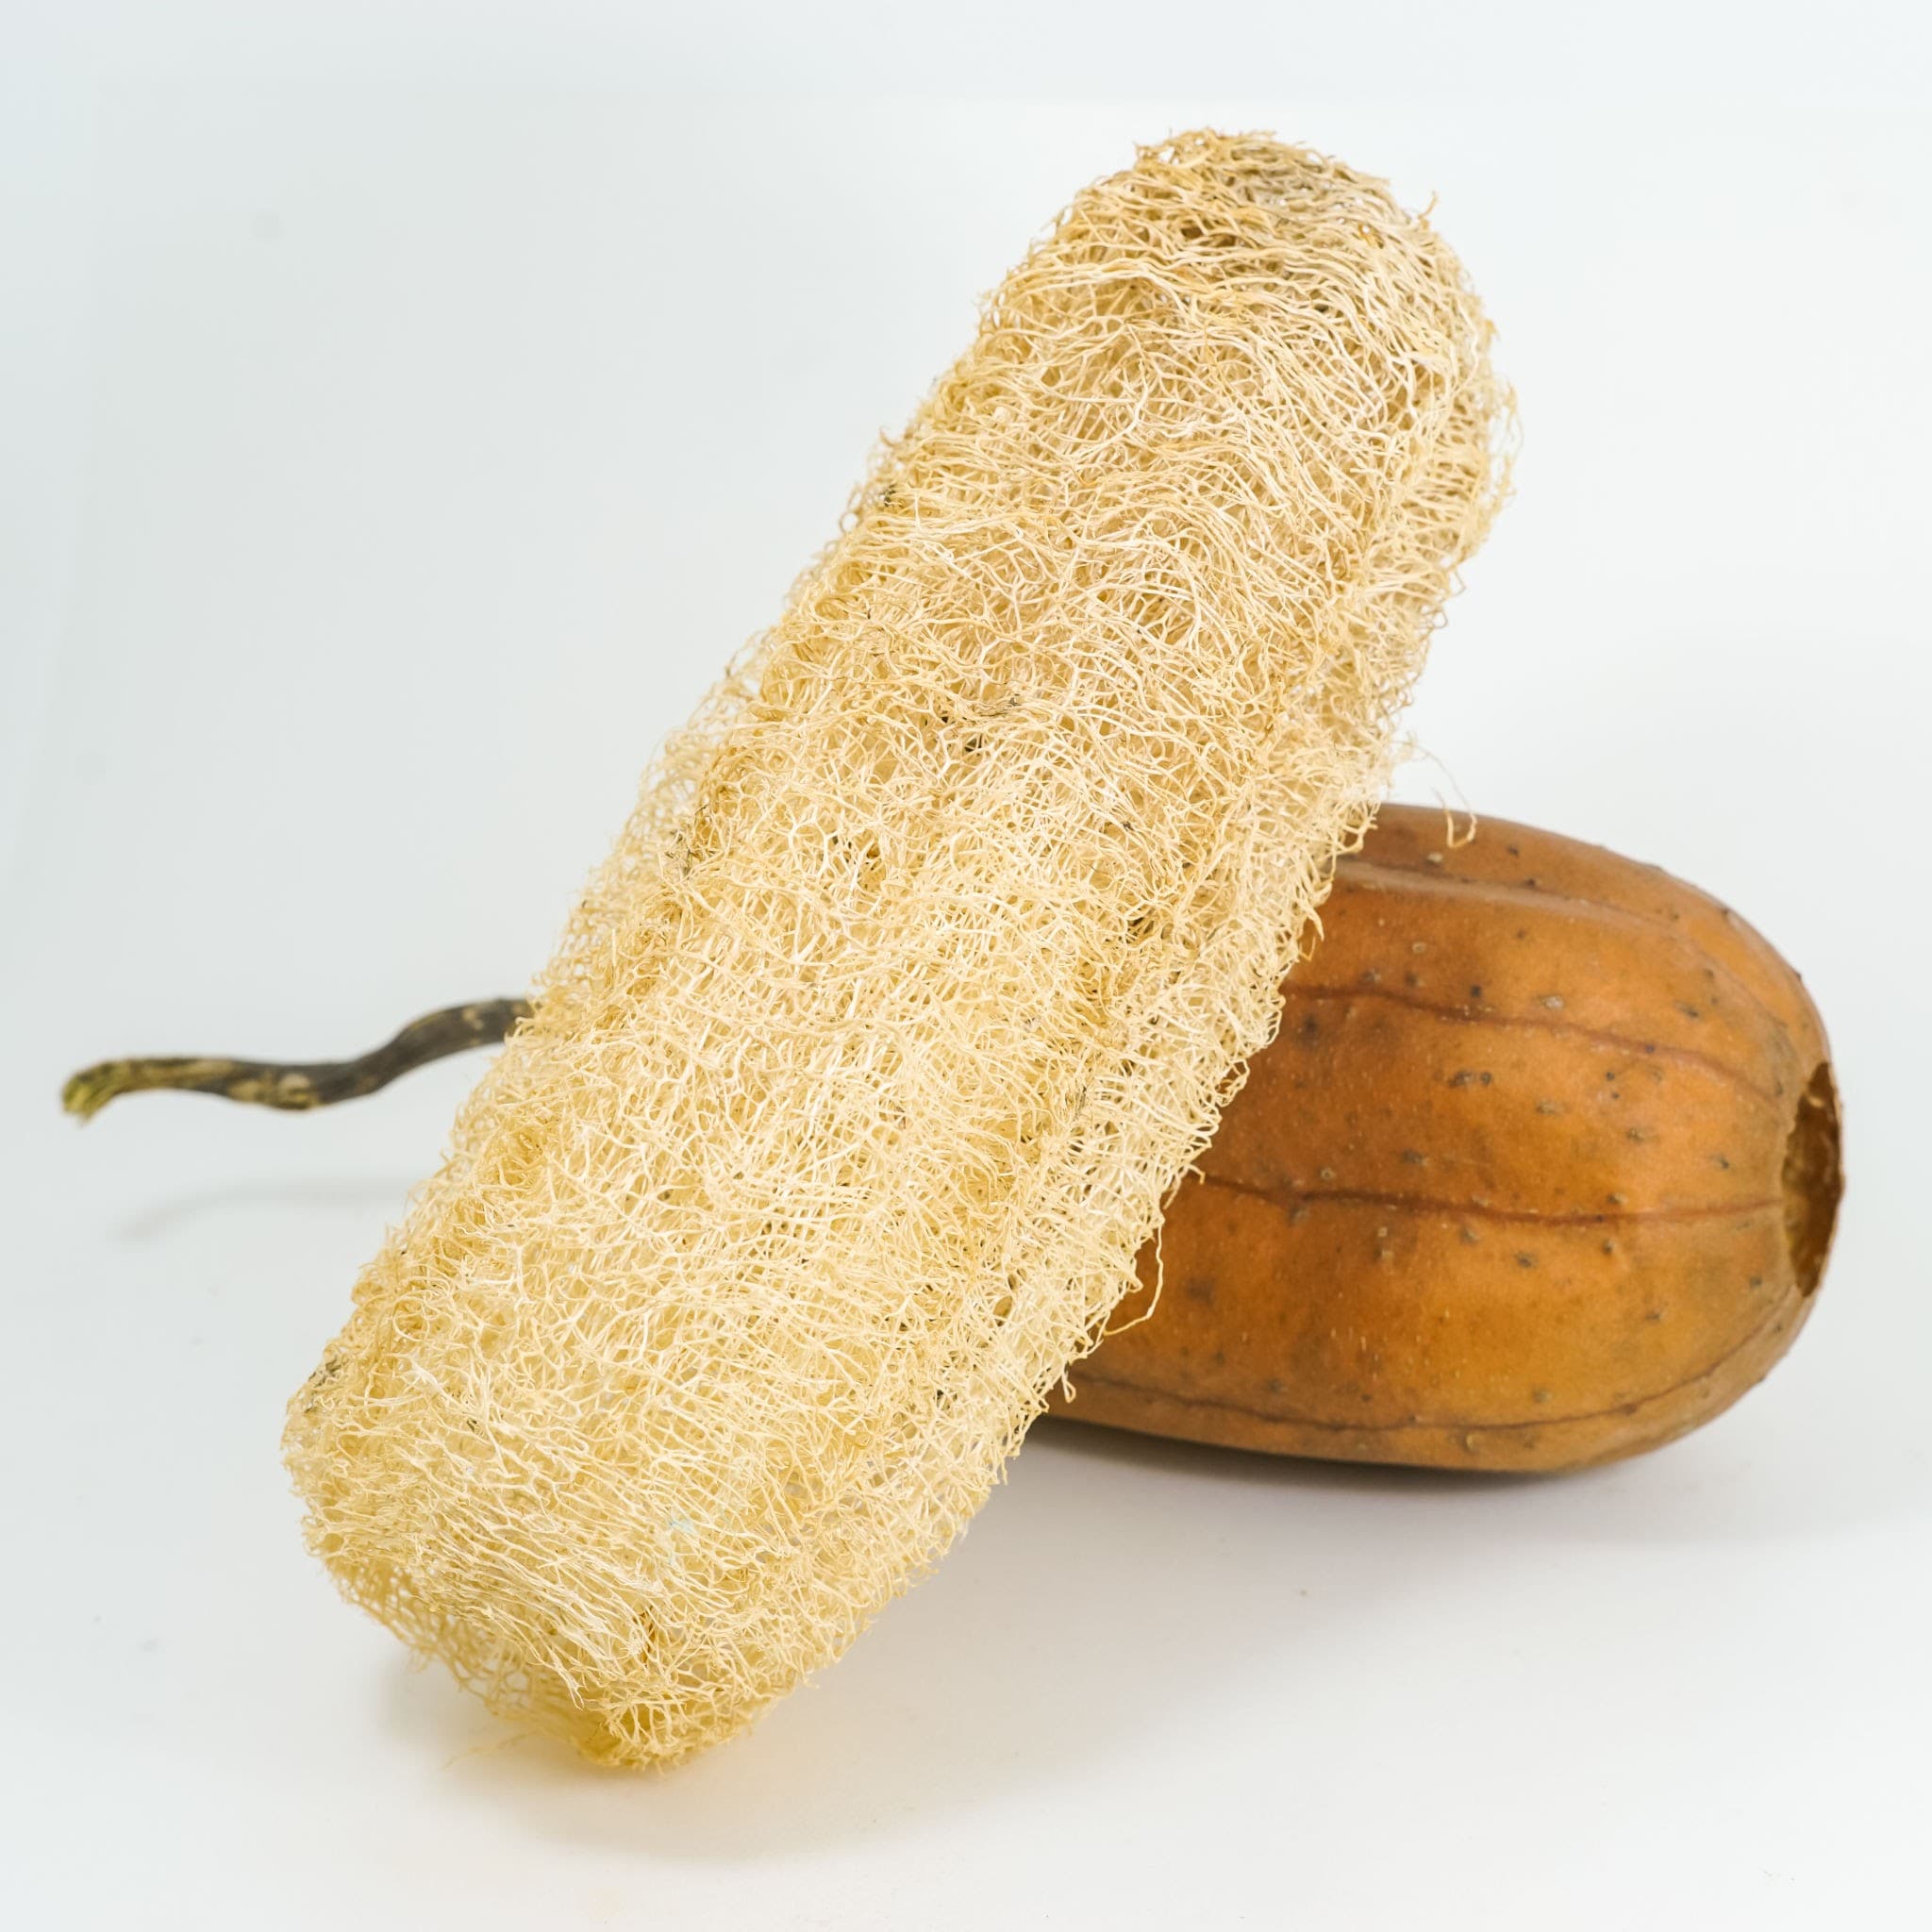 Wholesales natural loofah all sizes no chemical_Supply natural loofah sponge from Vietnam